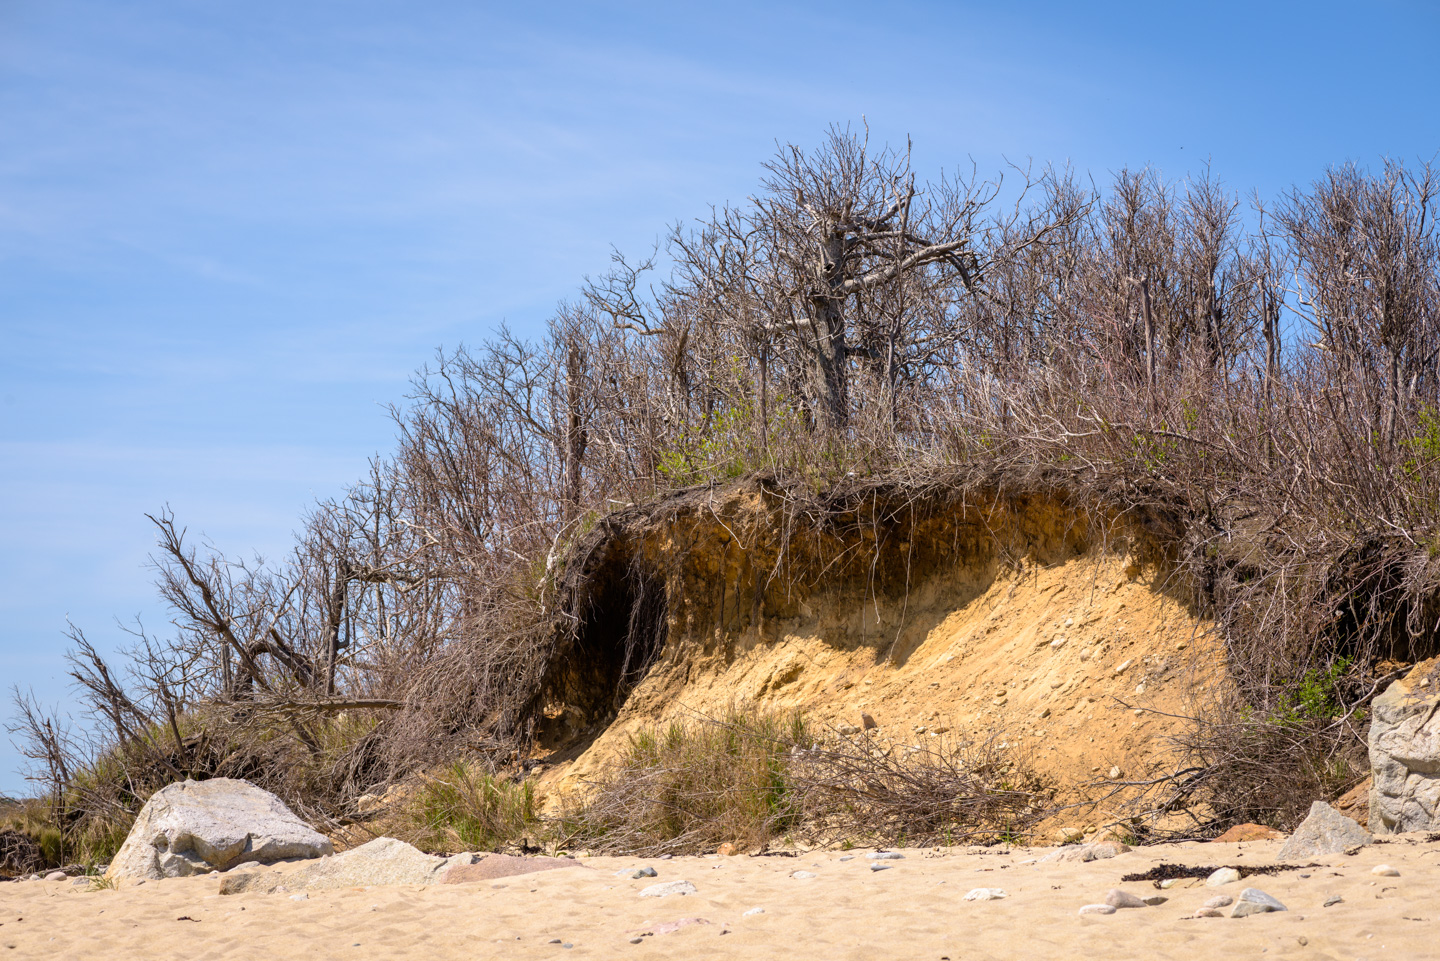 plant covered sand dune being eroded by the weather